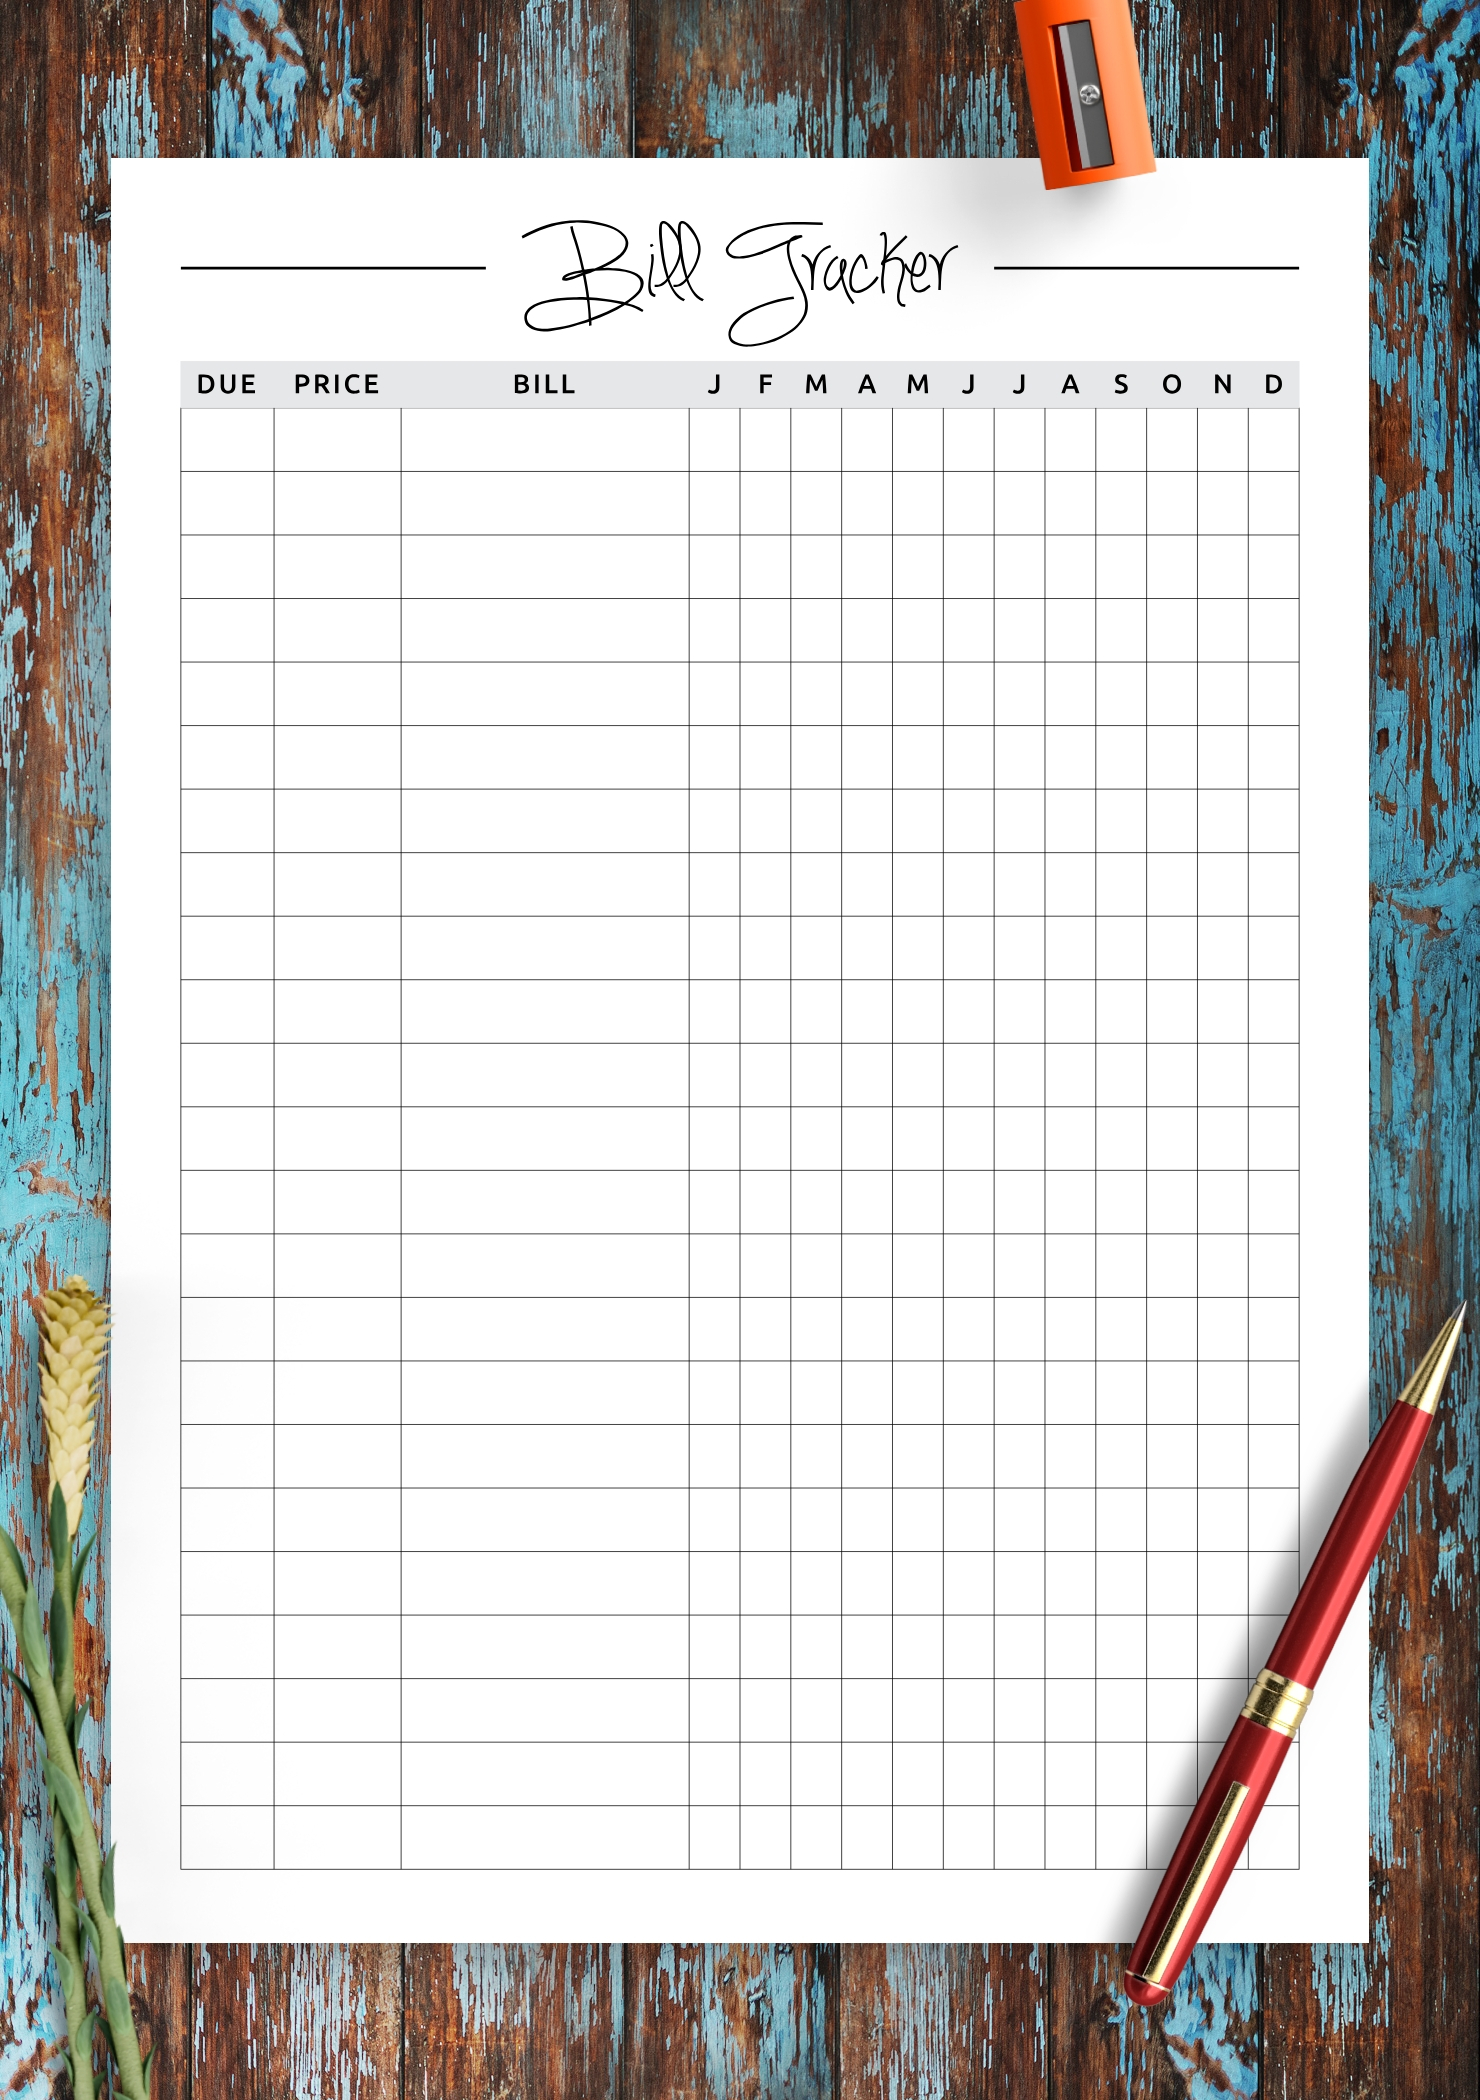 Fillable Monthly Bill Payment Worksheet Pdf  Template with Bill Calendar Template